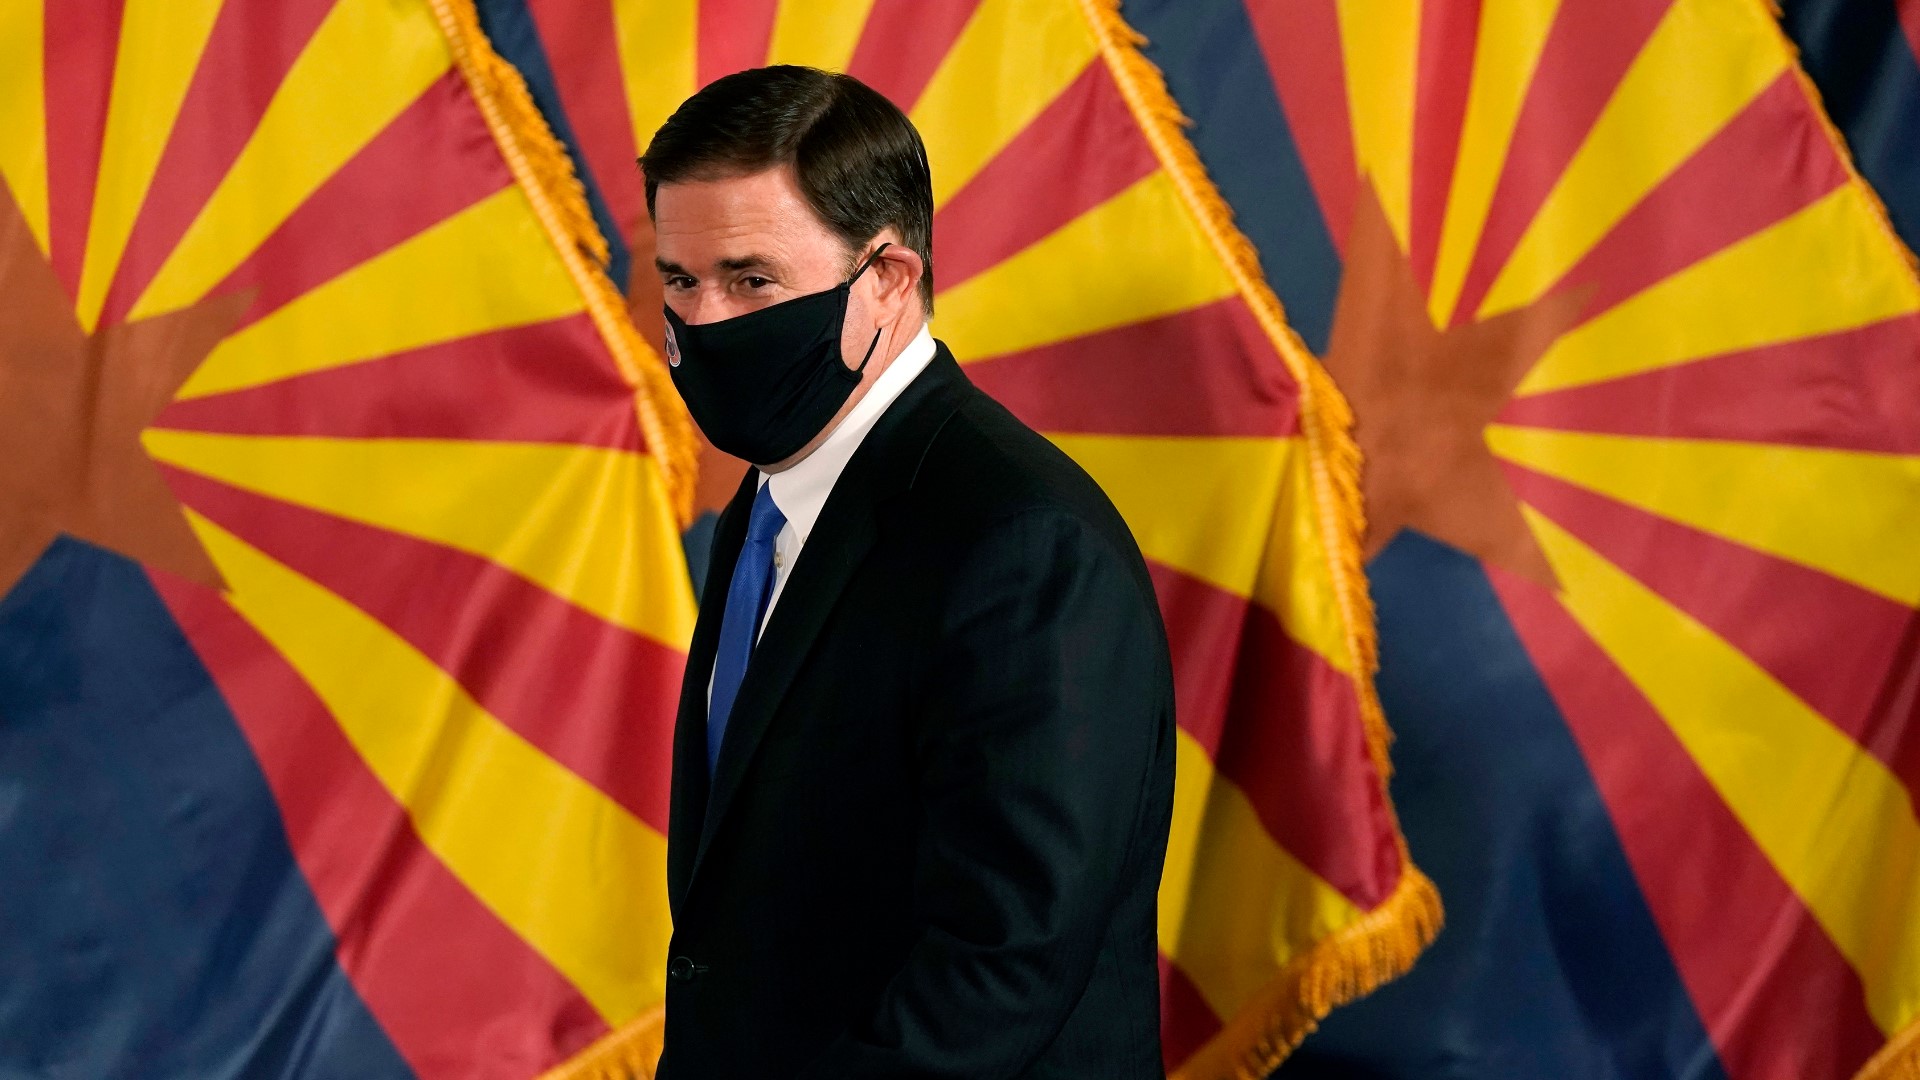 Arizona businesses won't have to follow their communities' mask requirements, under a bill signed by Gov. Ducey. The bill won't take effect immediately, however.